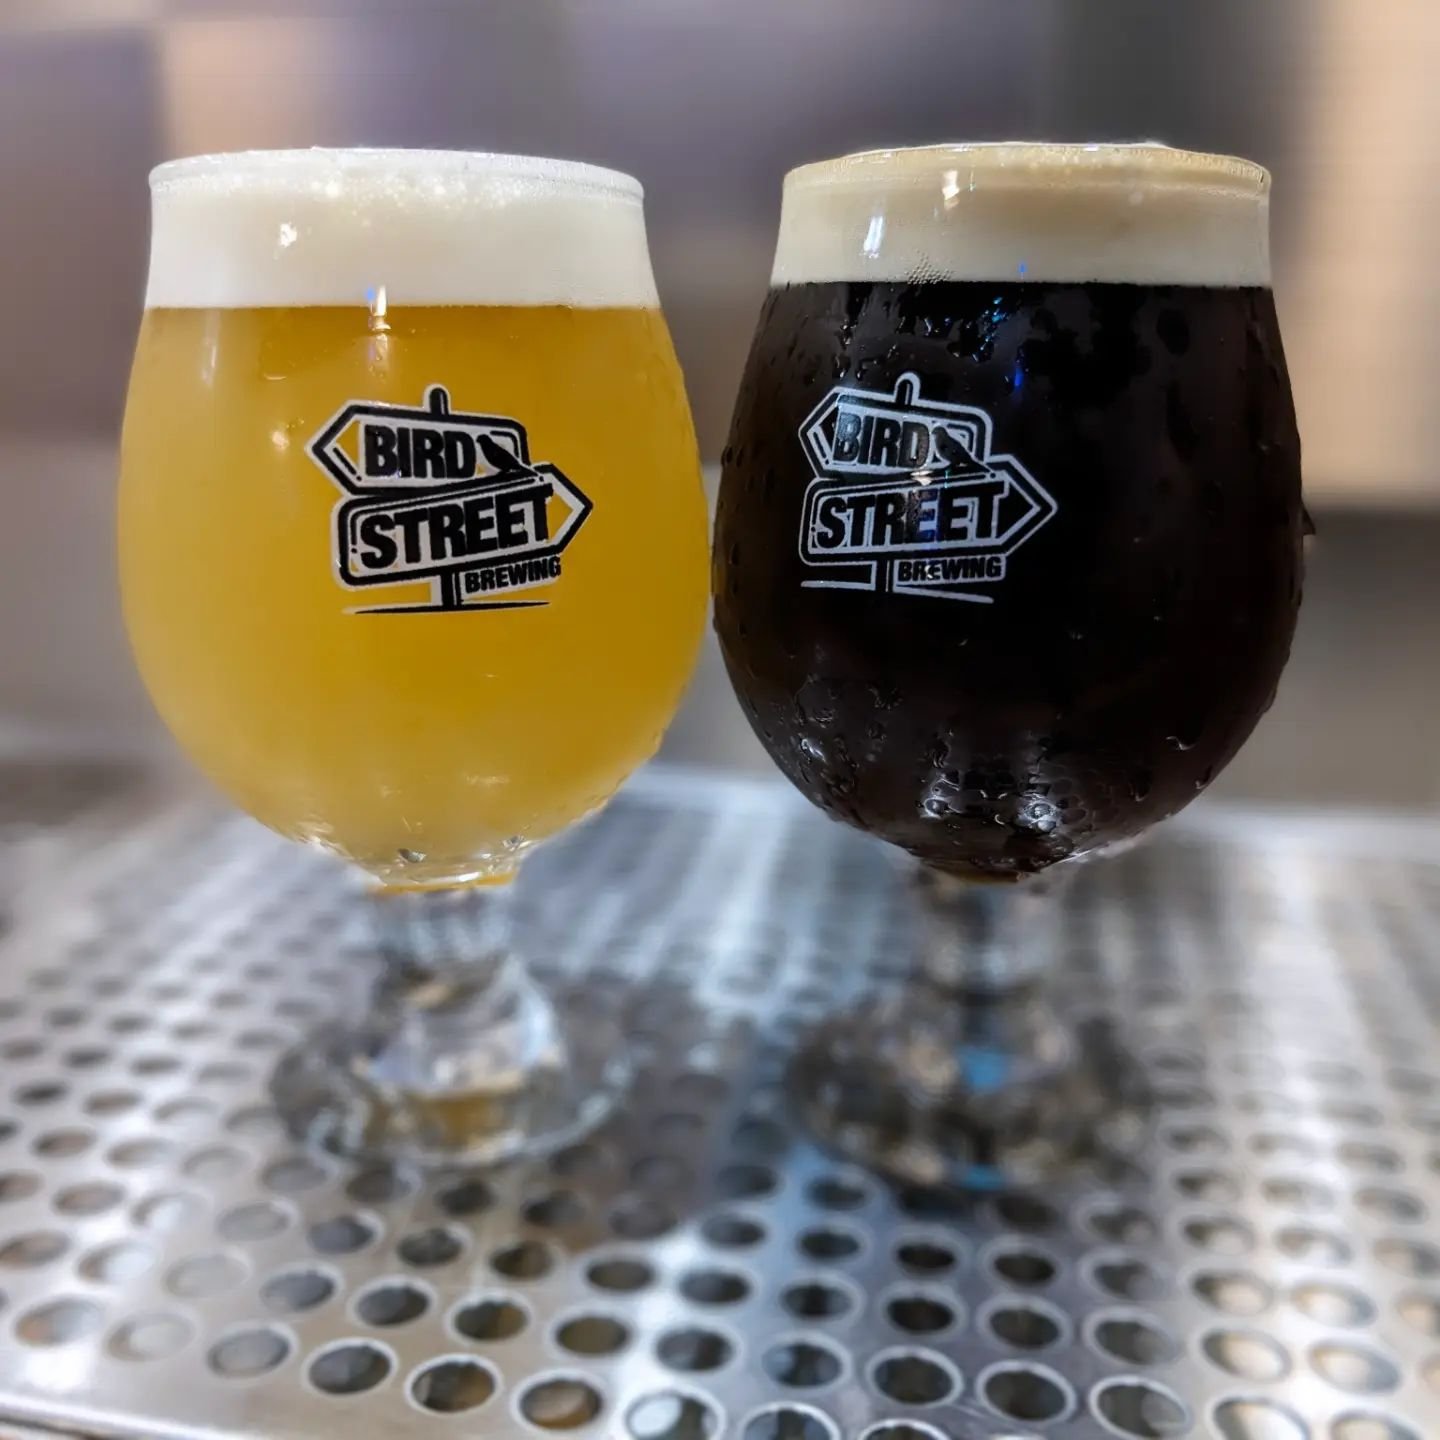 It's been a few weeks since we've updated the new beers, and here are our two latest.
&quot;Haw Haw!&quot; Is a hazy IPA made with 100% Nelson Sauvin hops from New Zealand and is full bodied with a tropical flavor and almost no bitterness.
We also ha